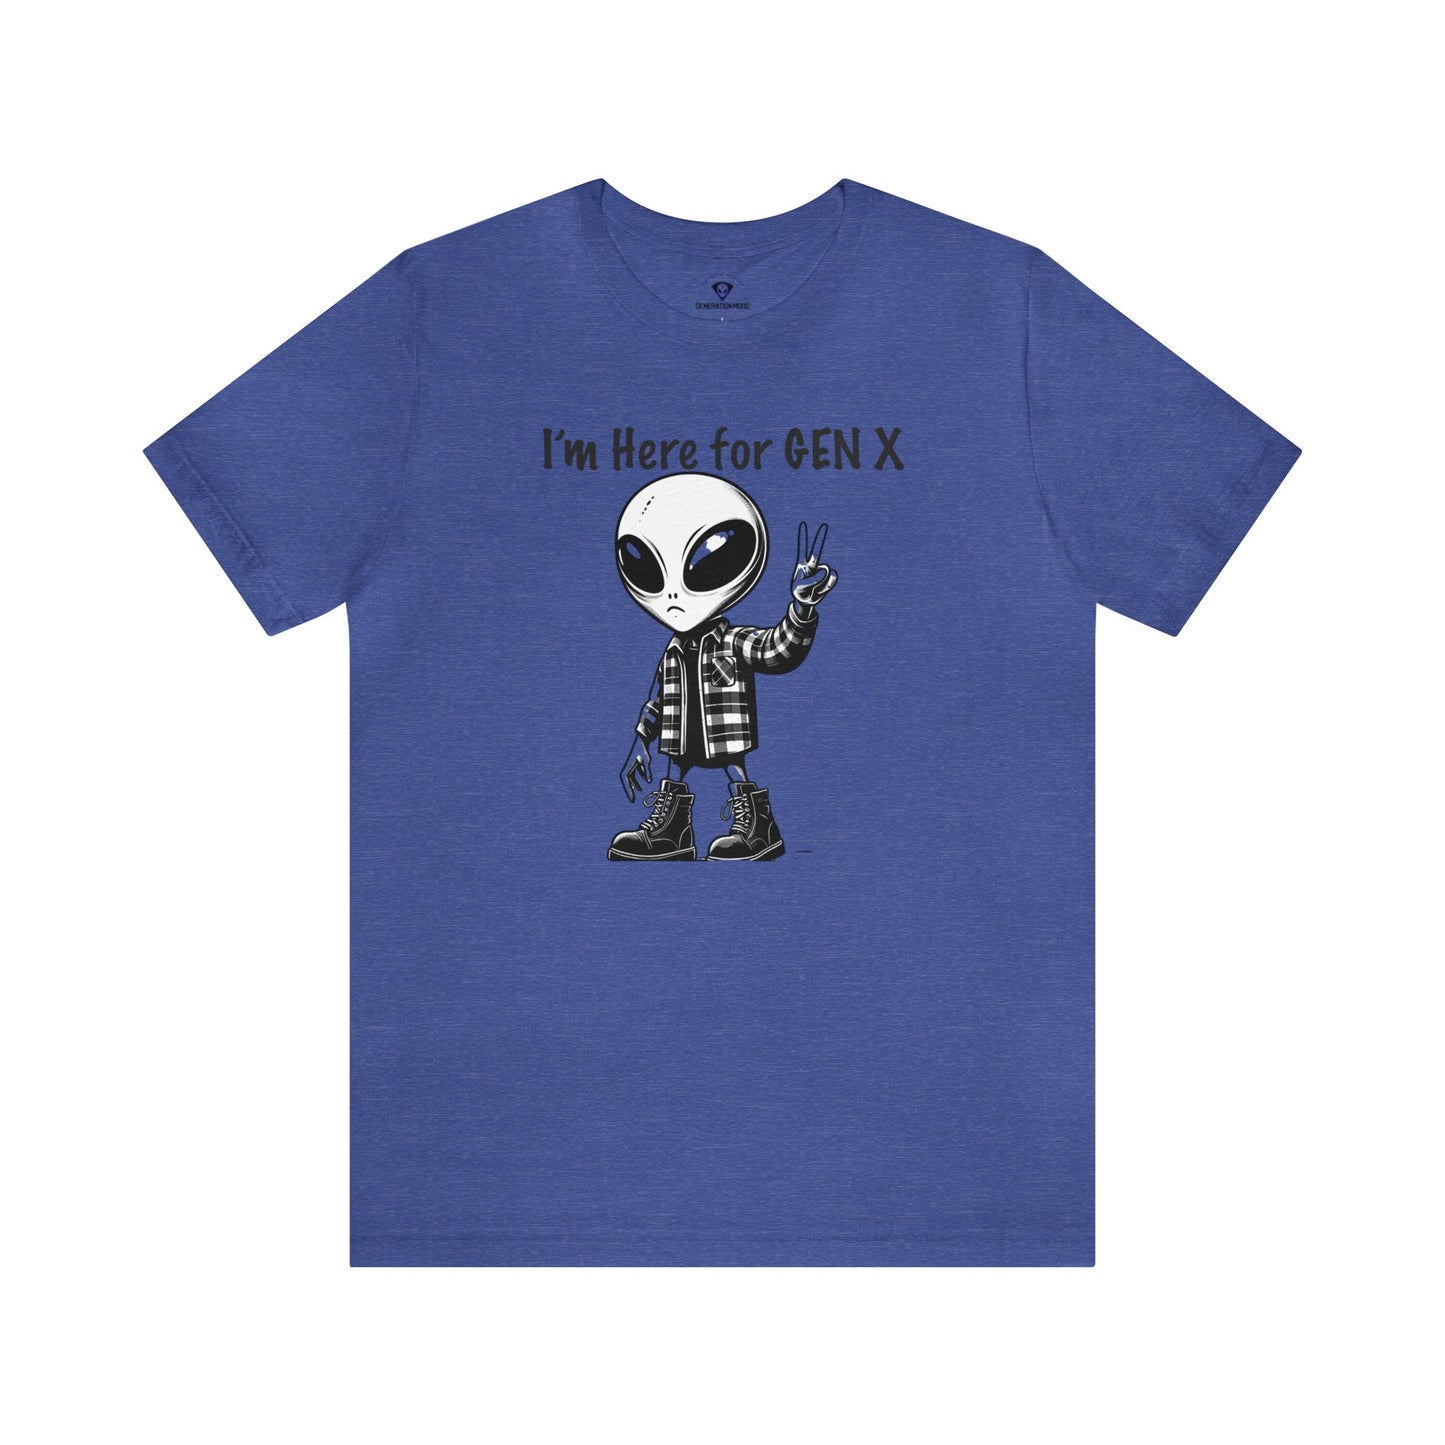 Royal Blue~ Are you a proud member of Generation X, the generation that grew up with minimal adult supervision? Do you identify with the grunge music scene, the critical thinking attitude, and the enterprising spirit of your peers? If so, you might like this T-shirt that features an alien with combat boots and a flannel shirt, flashing a peace sign, saying “I’m here for Gen X”.